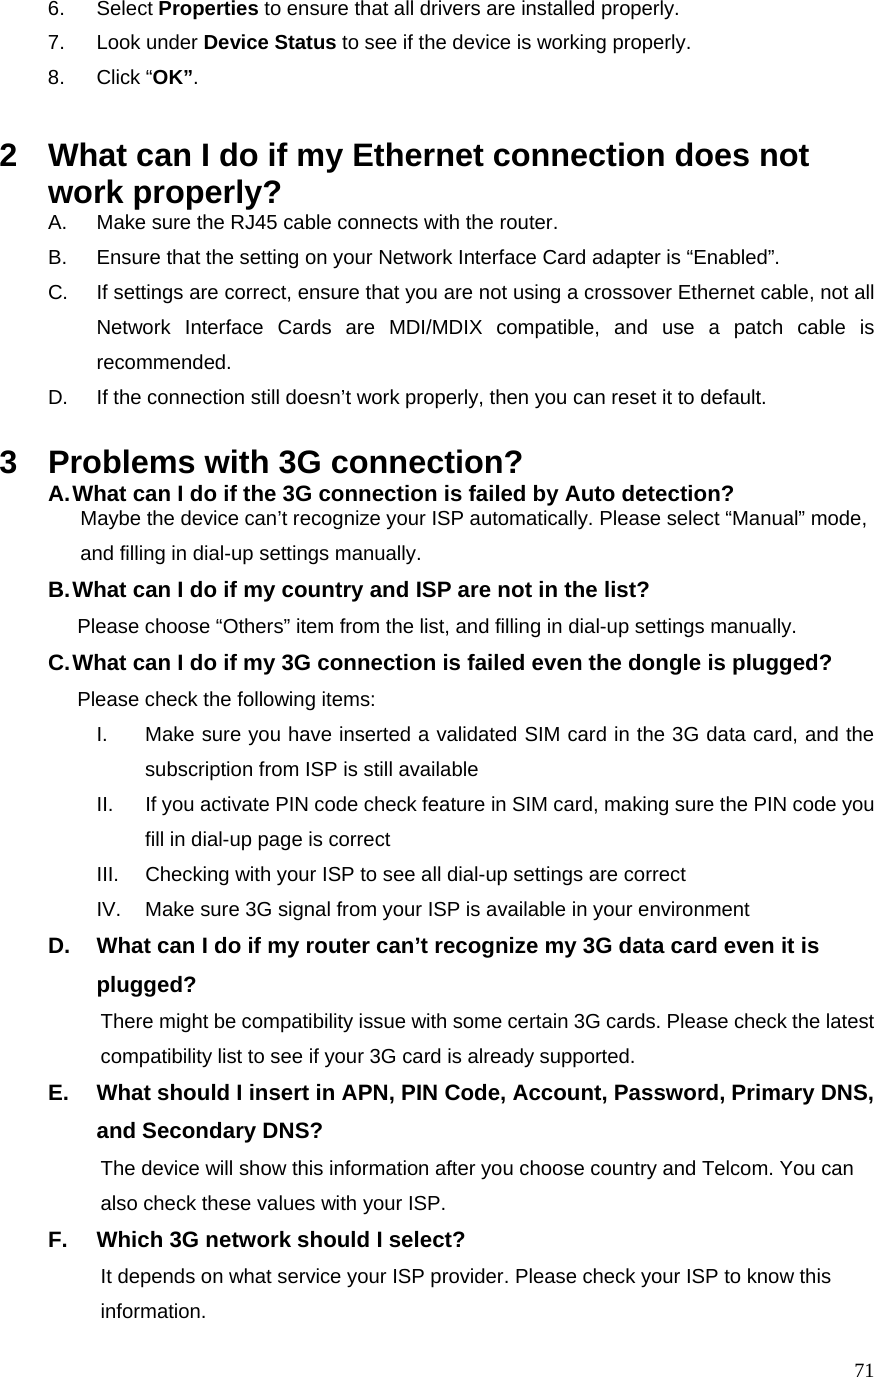  716. Select Properties to ensure that all drivers are installed properly. 7. Look under Device Status to see if the device is working properly. 8. Click “OK”.  2  What can I do if my Ethernet connection does not work properly? A.  Make sure the RJ45 cable connects with the router. B.  Ensure that the setting on your Network Interface Card adapter is “Enabled”. C.  If settings are correct, ensure that you are not using a crossover Ethernet cable, not all Network Interface Cards are MDI/MDIX compatible, and use a patch cable is recommended. D.  If the connection still doesn’t work properly, then you can reset it to default.      3  Problems with 3G connection? A. What can I do if the 3G connection is failed by Auto detection?           Maybe the device can’t recognize your ISP automatically. Please select “Manual” mode,                       and filling in dial-up settings manually. B. What can I do if my country and ISP are not in the list?        Please choose “Others” item from the list, and filling in dial-up settings manually. C. What can I do if my 3G connection is failed even the dongle is plugged?        Please check the following items: I.  Make sure you have inserted a validated SIM card in the 3G data card, and the subscription from ISP is still available II.  If you activate PIN code check feature in SIM card, making sure the PIN code you fill in dial-up page is correct III.  Checking with your ISP to see all dial-up settings are correct IV.  Make sure 3G signal from your ISP is available in your environment D.  What can I do if my router can’t recognize my 3G data card even it is plugged?           There might be compatibility issue with some certain 3G cards. Please check the latest                           compatibility list to see if your 3G card is already supported. E.  What should I insert in APN, PIN Code, Account, Password, Primary DNS, and Secondary DNS?                     The device will show this information after you choose country and Telcom. You can                   also check these values with your ISP. F.  Which 3G network should I select?                     It depends on what service your ISP provider. Please check your ISP to know this             information. 